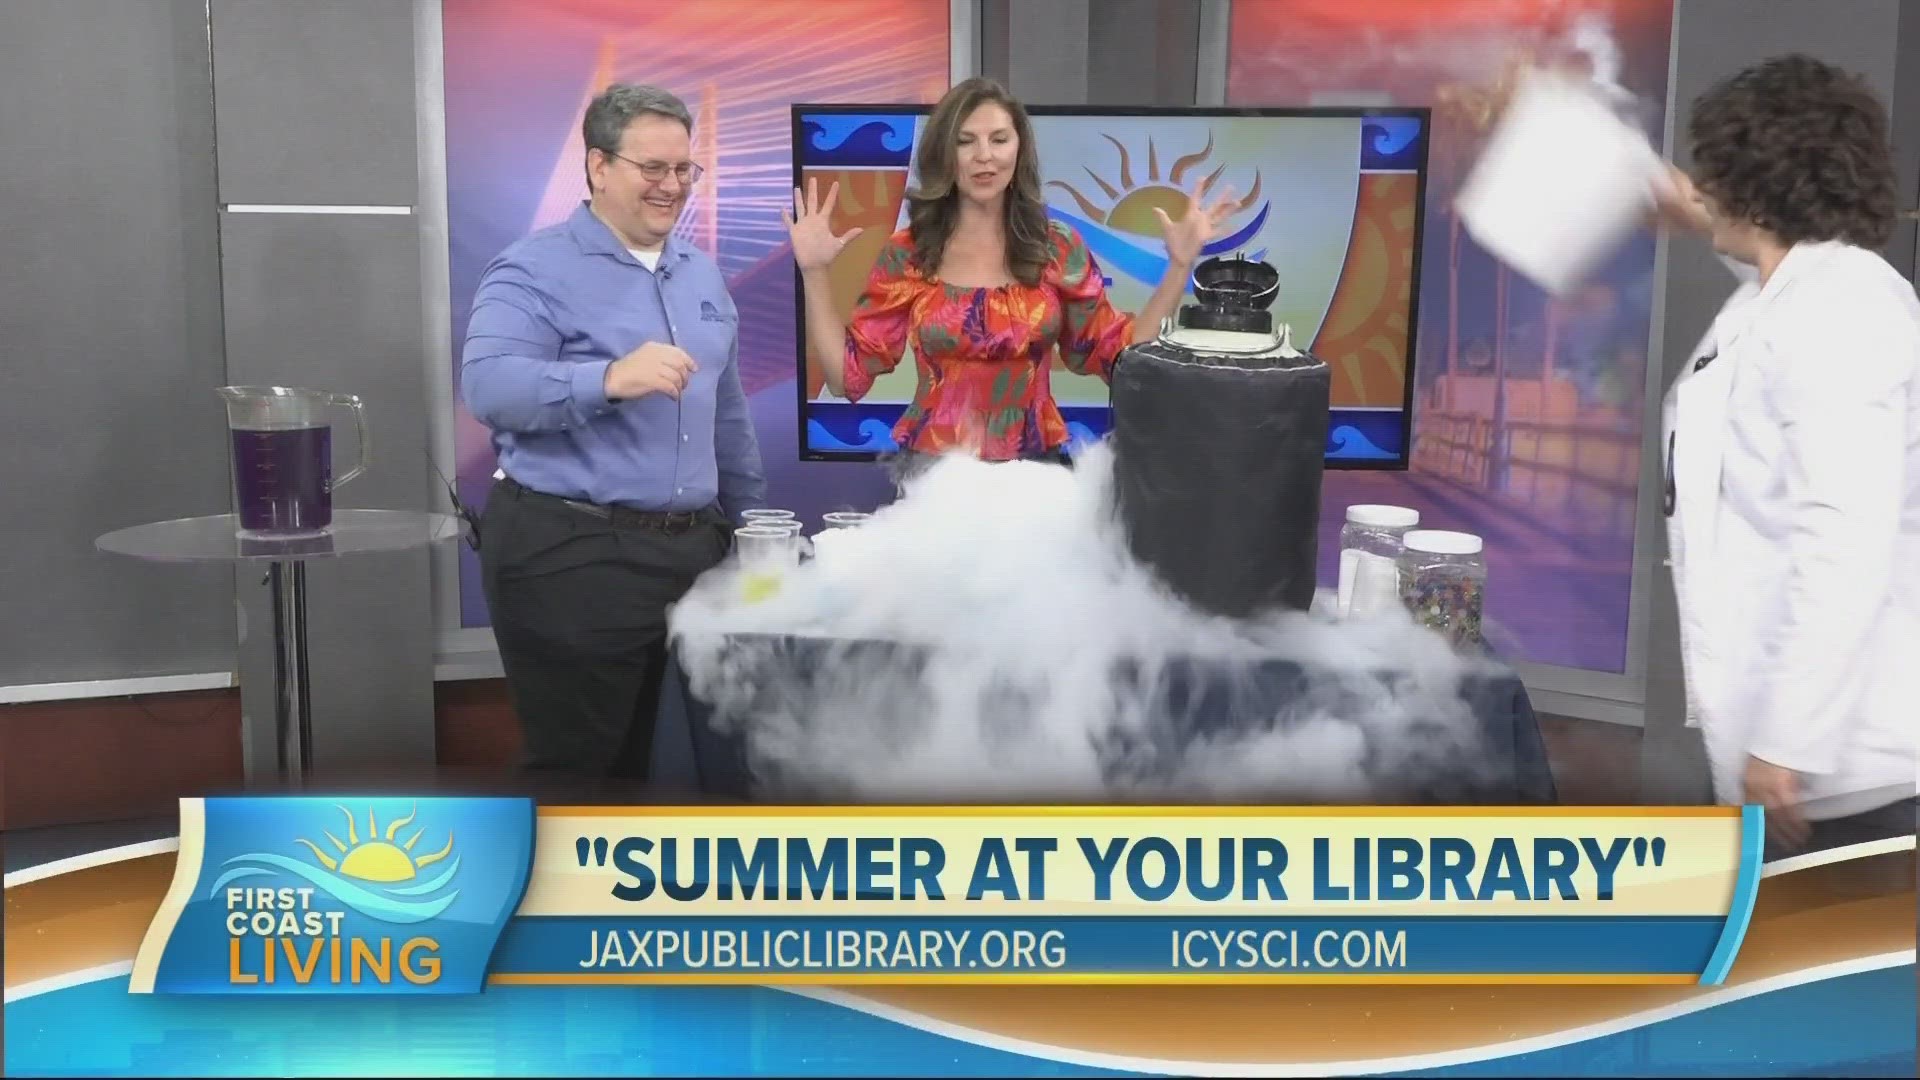 The ICY Science Show is one of the many things kids and adults will enjoy at the Jacksonville Public Library this summer.